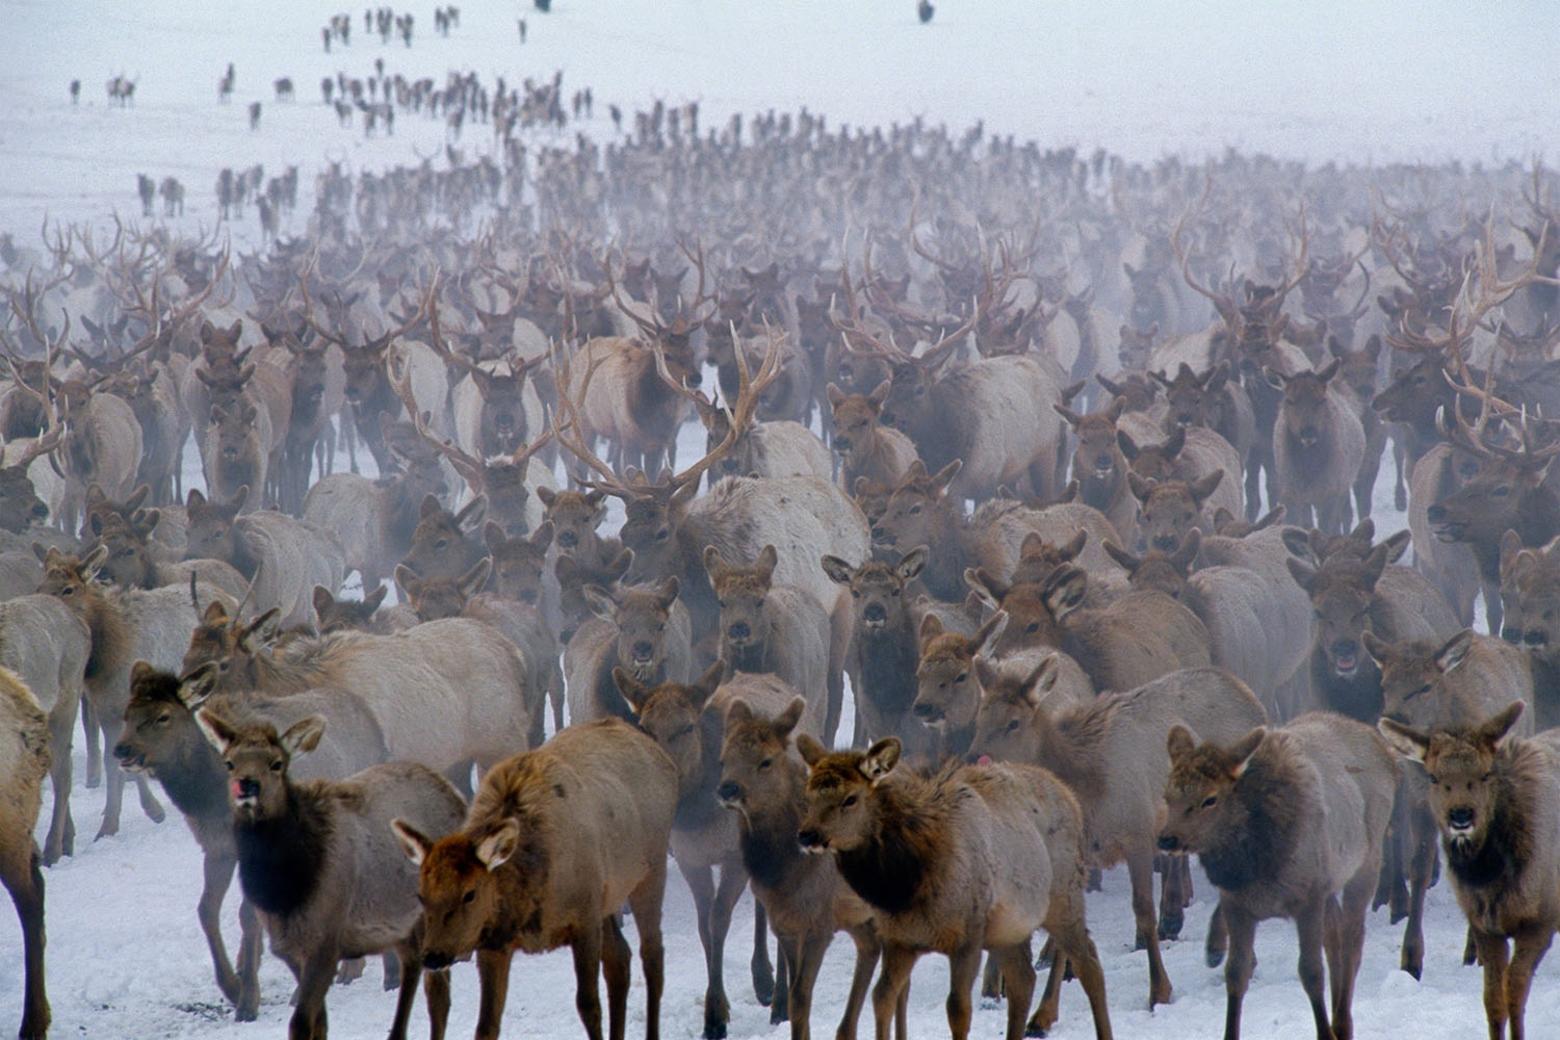 Is this where a pandemic of Chronic Wasting Disease in Greater Yellowstone could begin? Thousands of elk bunched together on the National Elk Refuge in Jackson Hole, Wyoming.  Photograph "Winter Herd" by Thomas D. Mangelsen